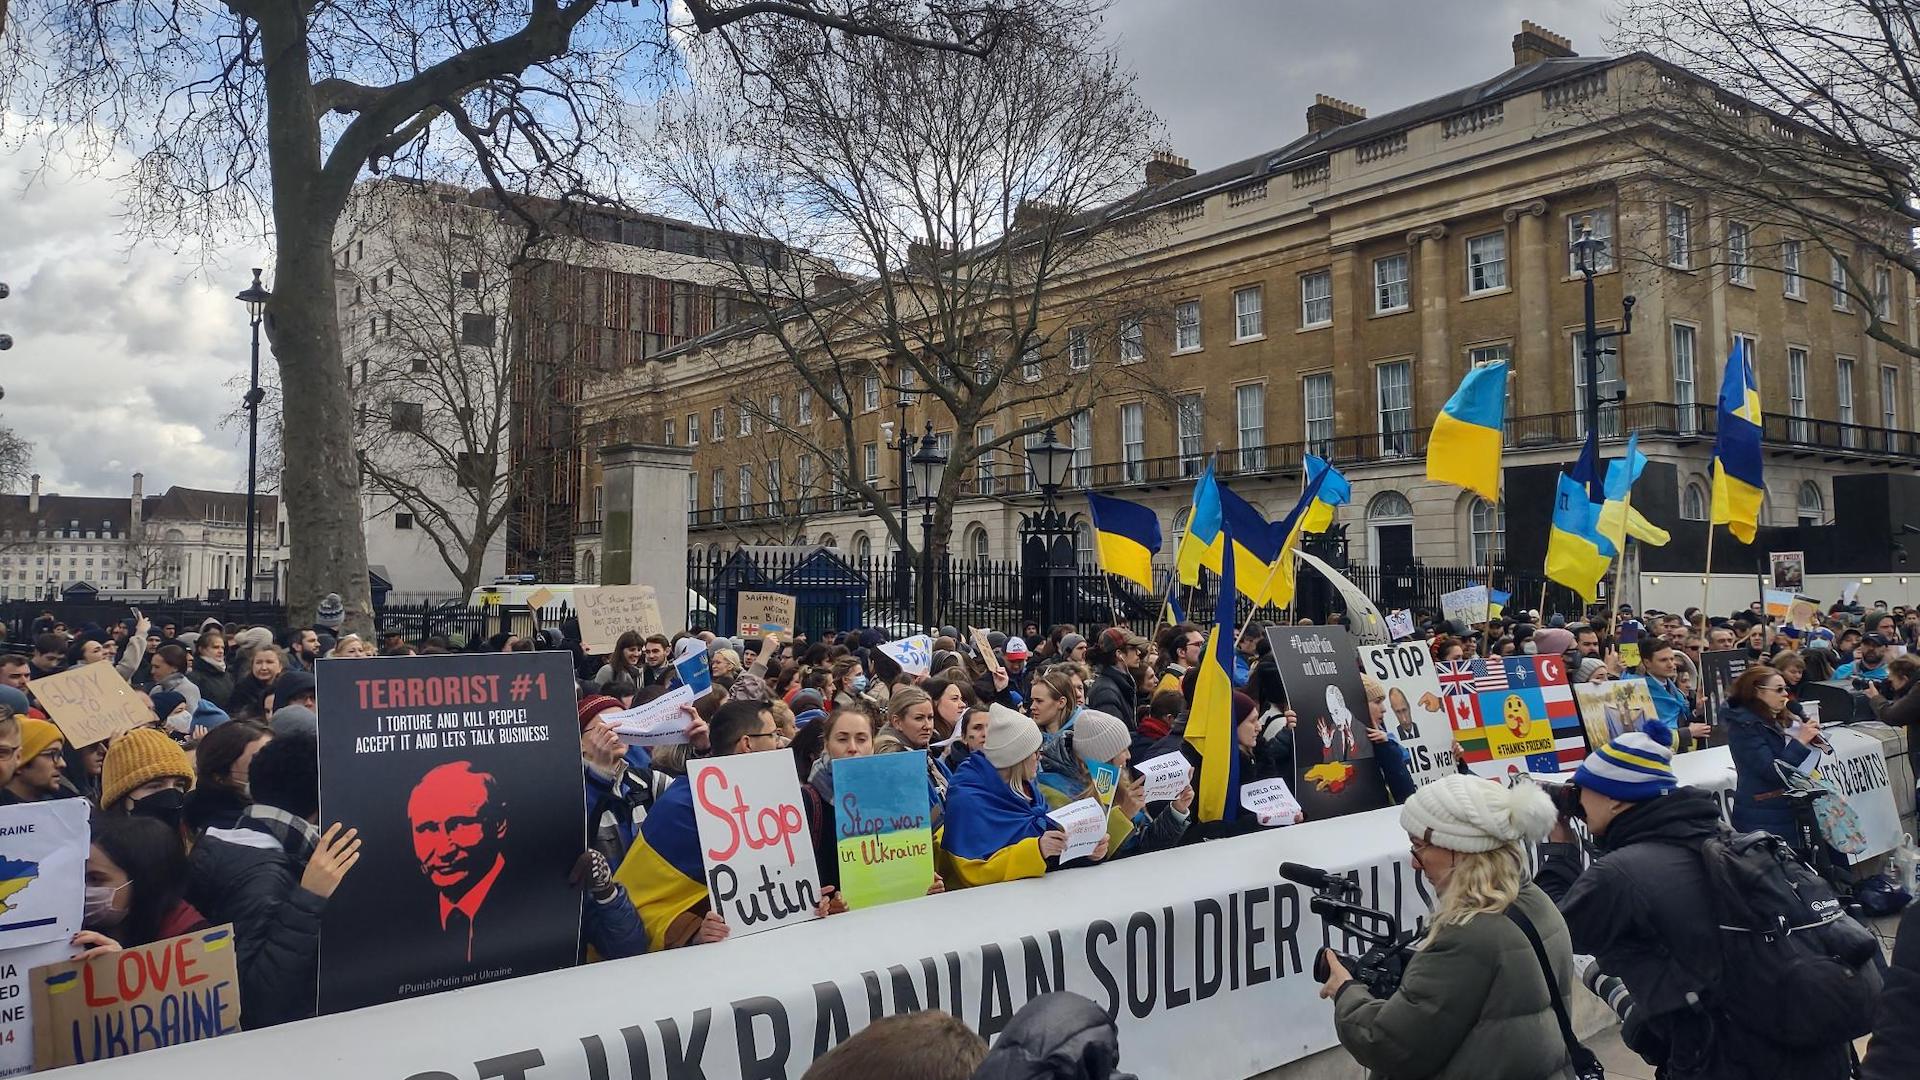 Blue and yellow Ukrainian flags fly outside Downing Street as hundreds protest the invasion by Russia